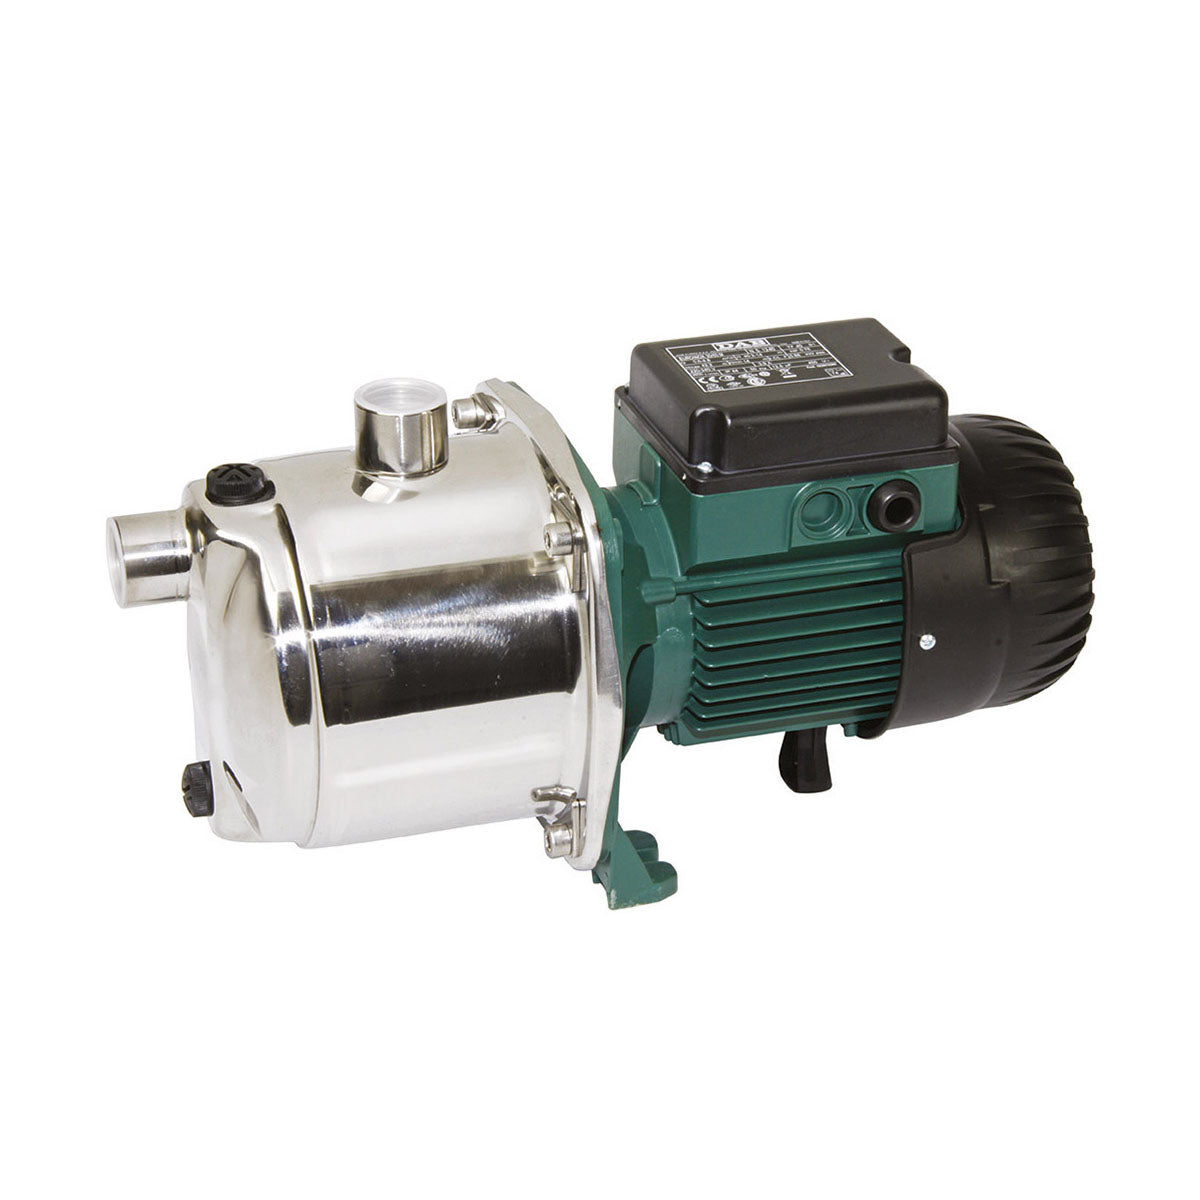 DAB Euroinox 30/50 pump with stainless steel pump body